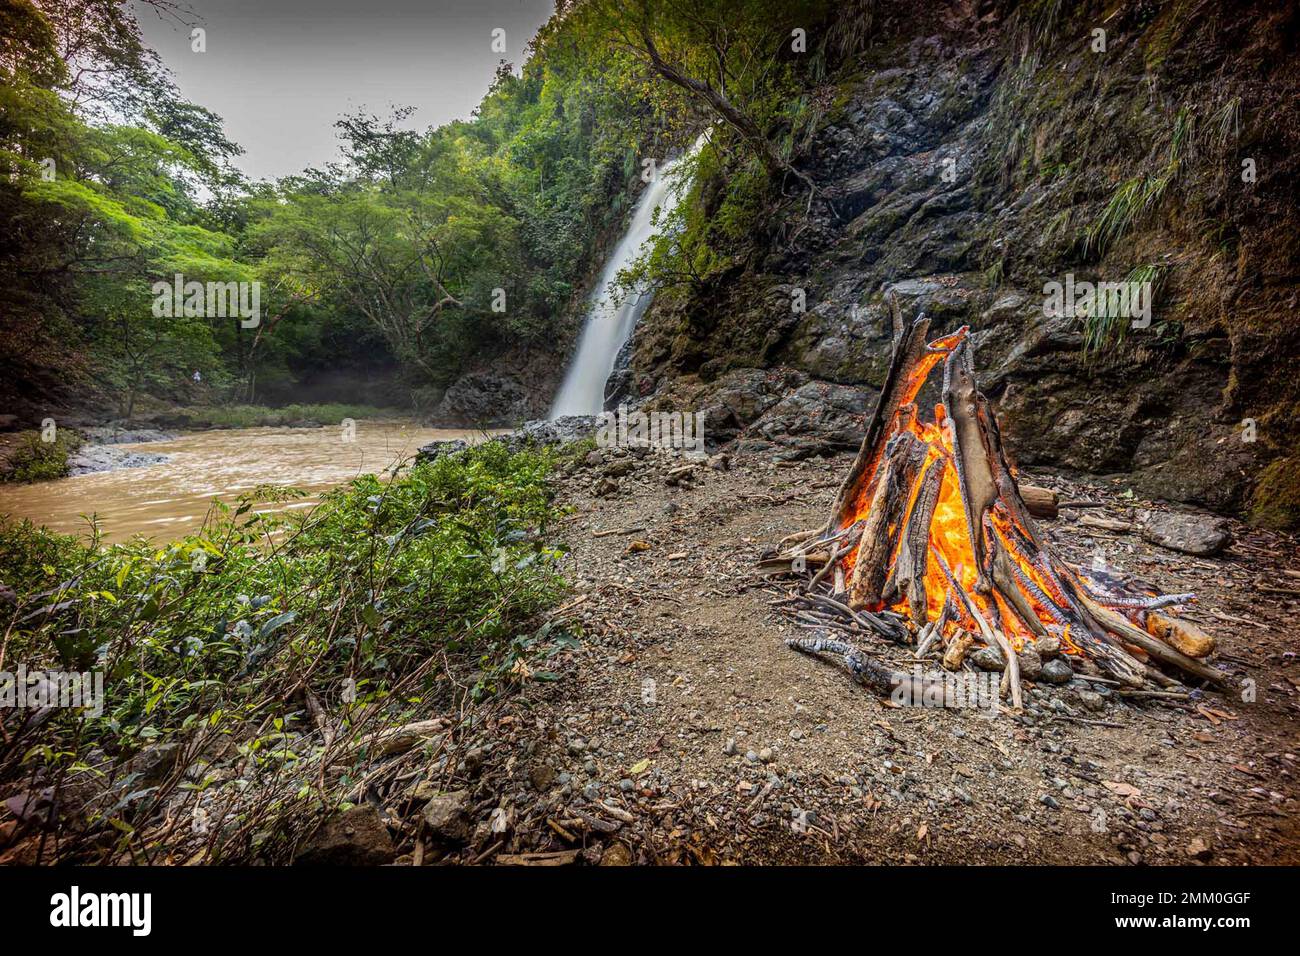 Camp fire on the beach at Santa Teresa a small town in Puntarenas Province, Costa Rica. Santa Teresa started as a remote fishing village, relying on a Stock Photo